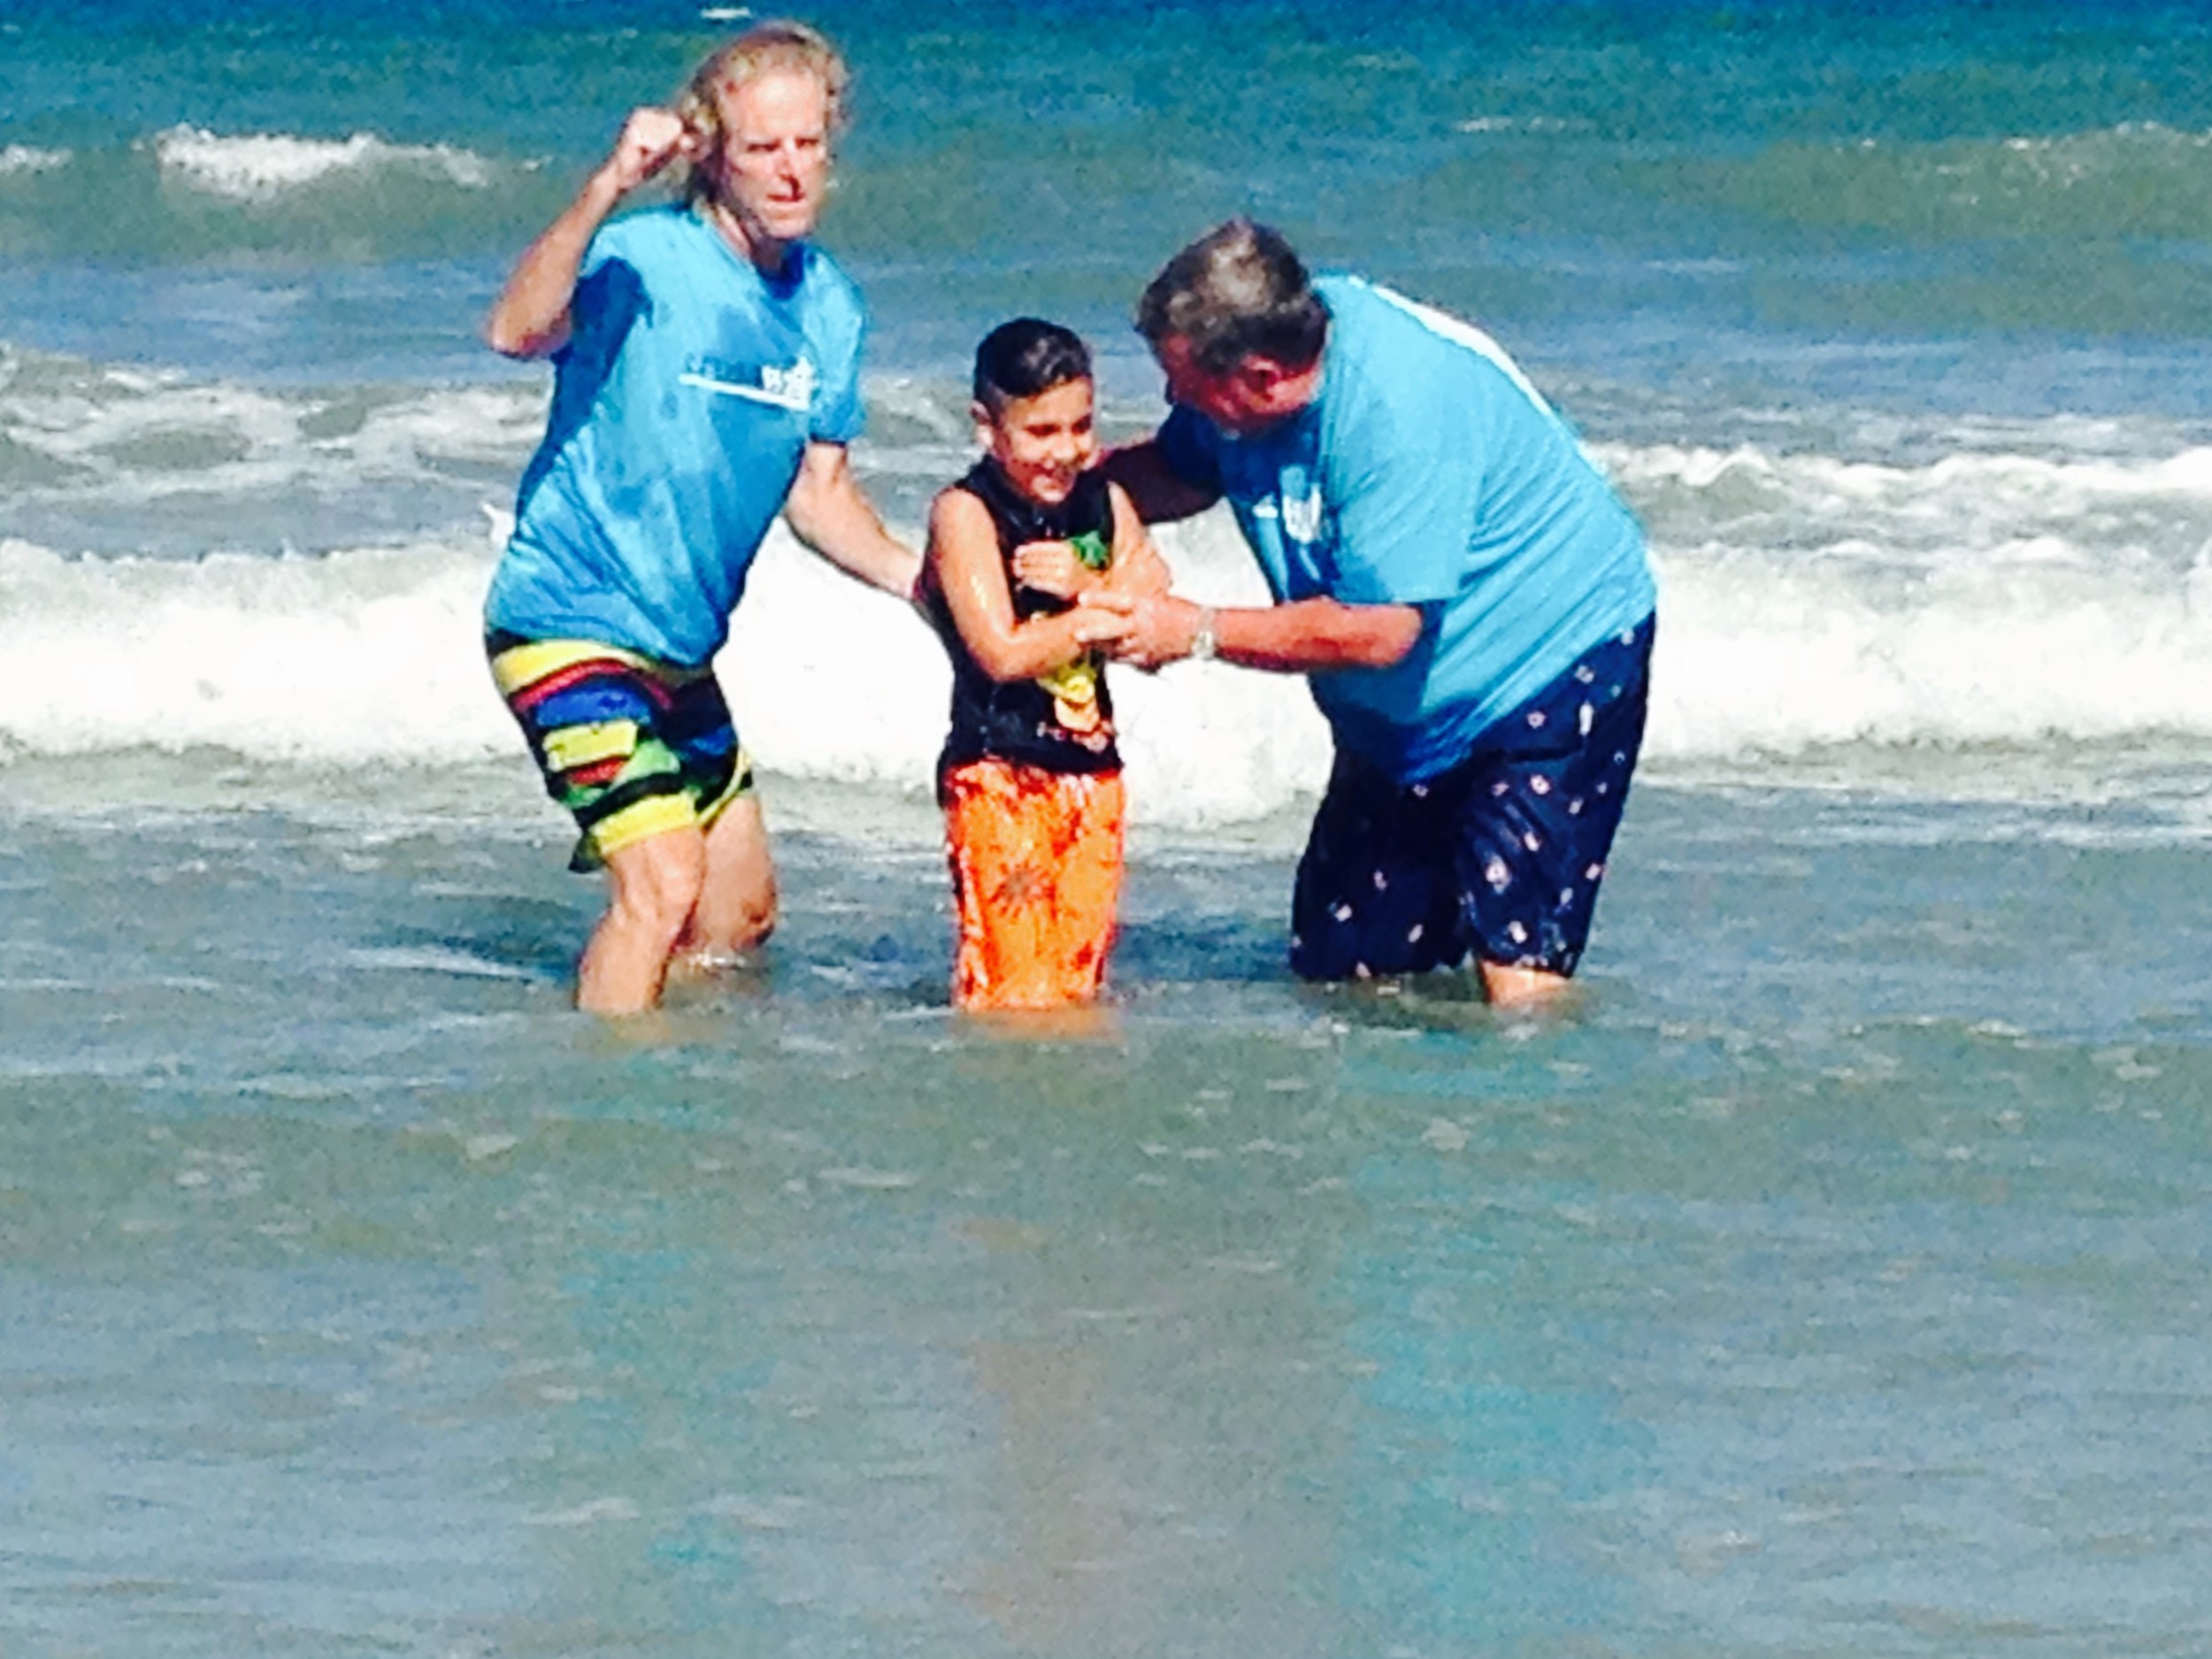 A young boy professes his faith in Jesus through baptism.